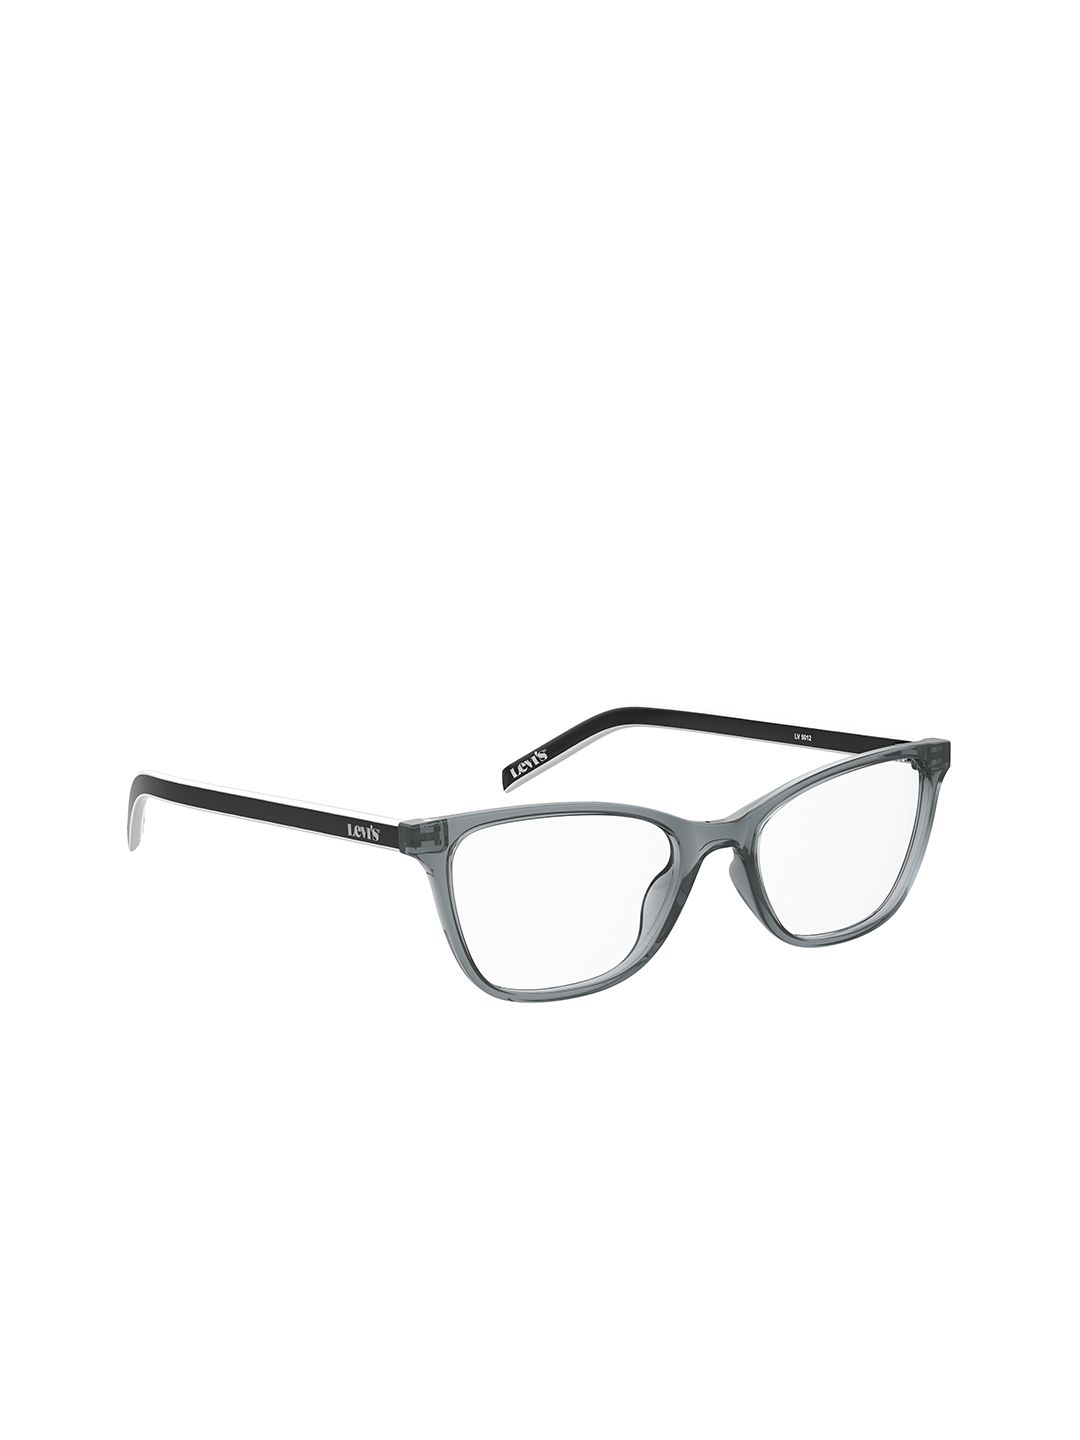 Levis Women Clear Lens & Silver-Toned Other Sunglasses with Polarised Lens Price in India